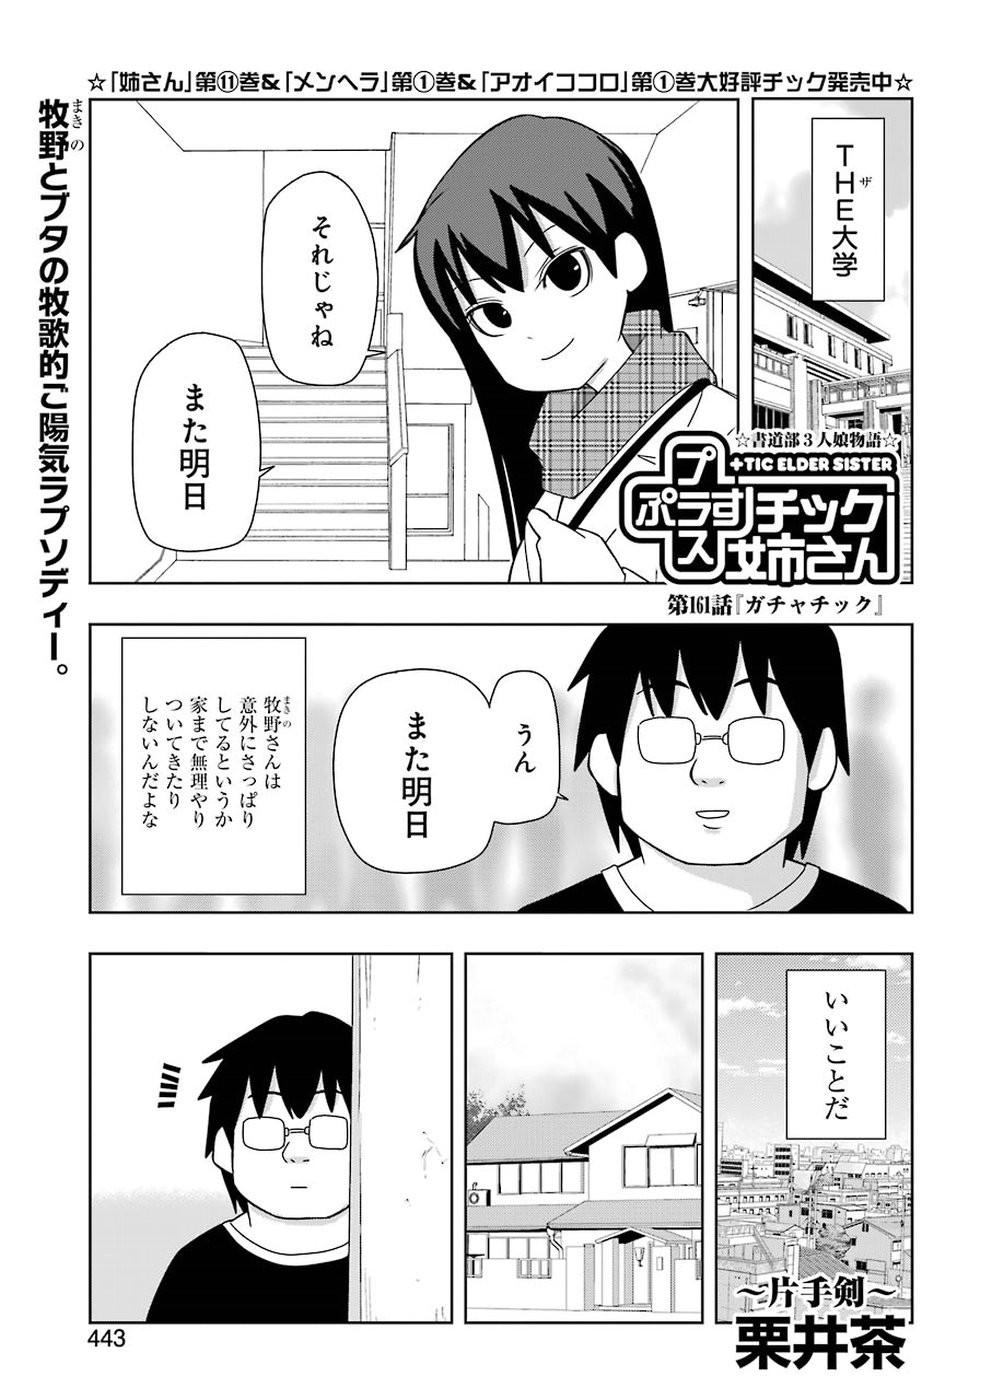 + Tic Nee-san - Chapter 161 - Page 1